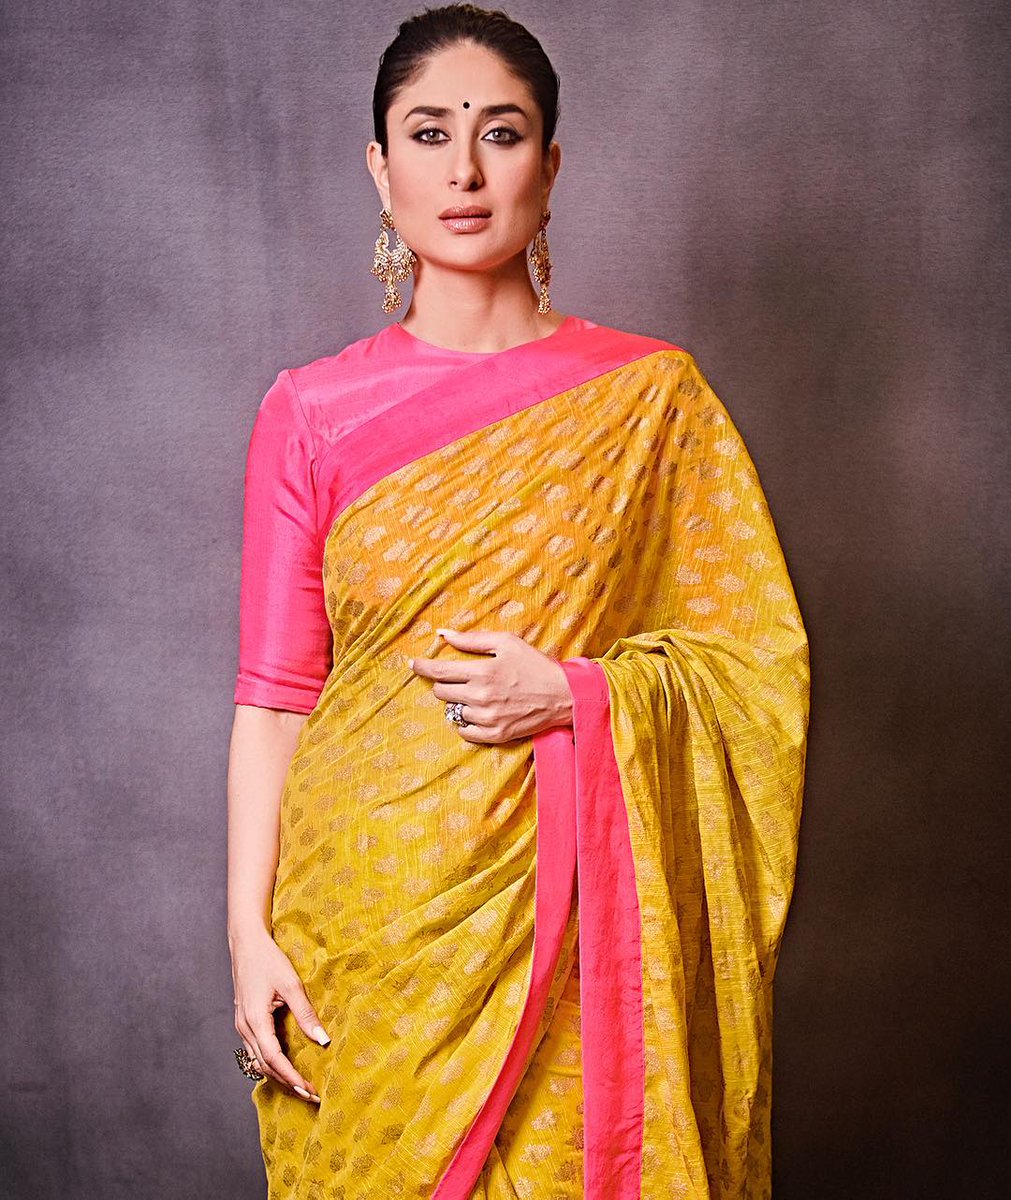 A Political Party Wants Kareena Kapoor Khan To Contest Elections. Will